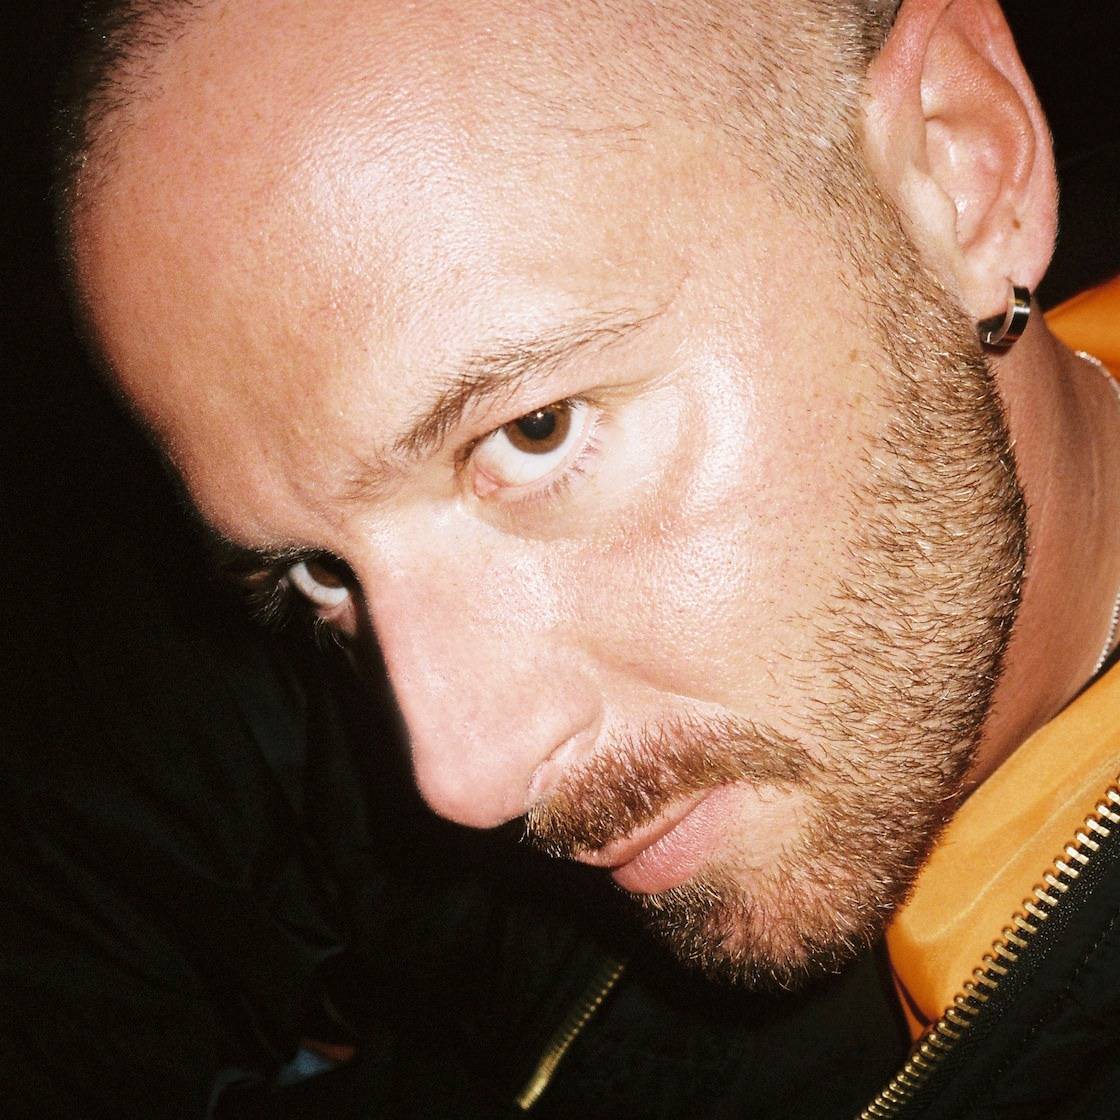 Demna Gvasalia, Vetements founder and Balenciaga's artistic director, talks about Vetements and the release of “Vetements by Pierre-Ange Carloti”